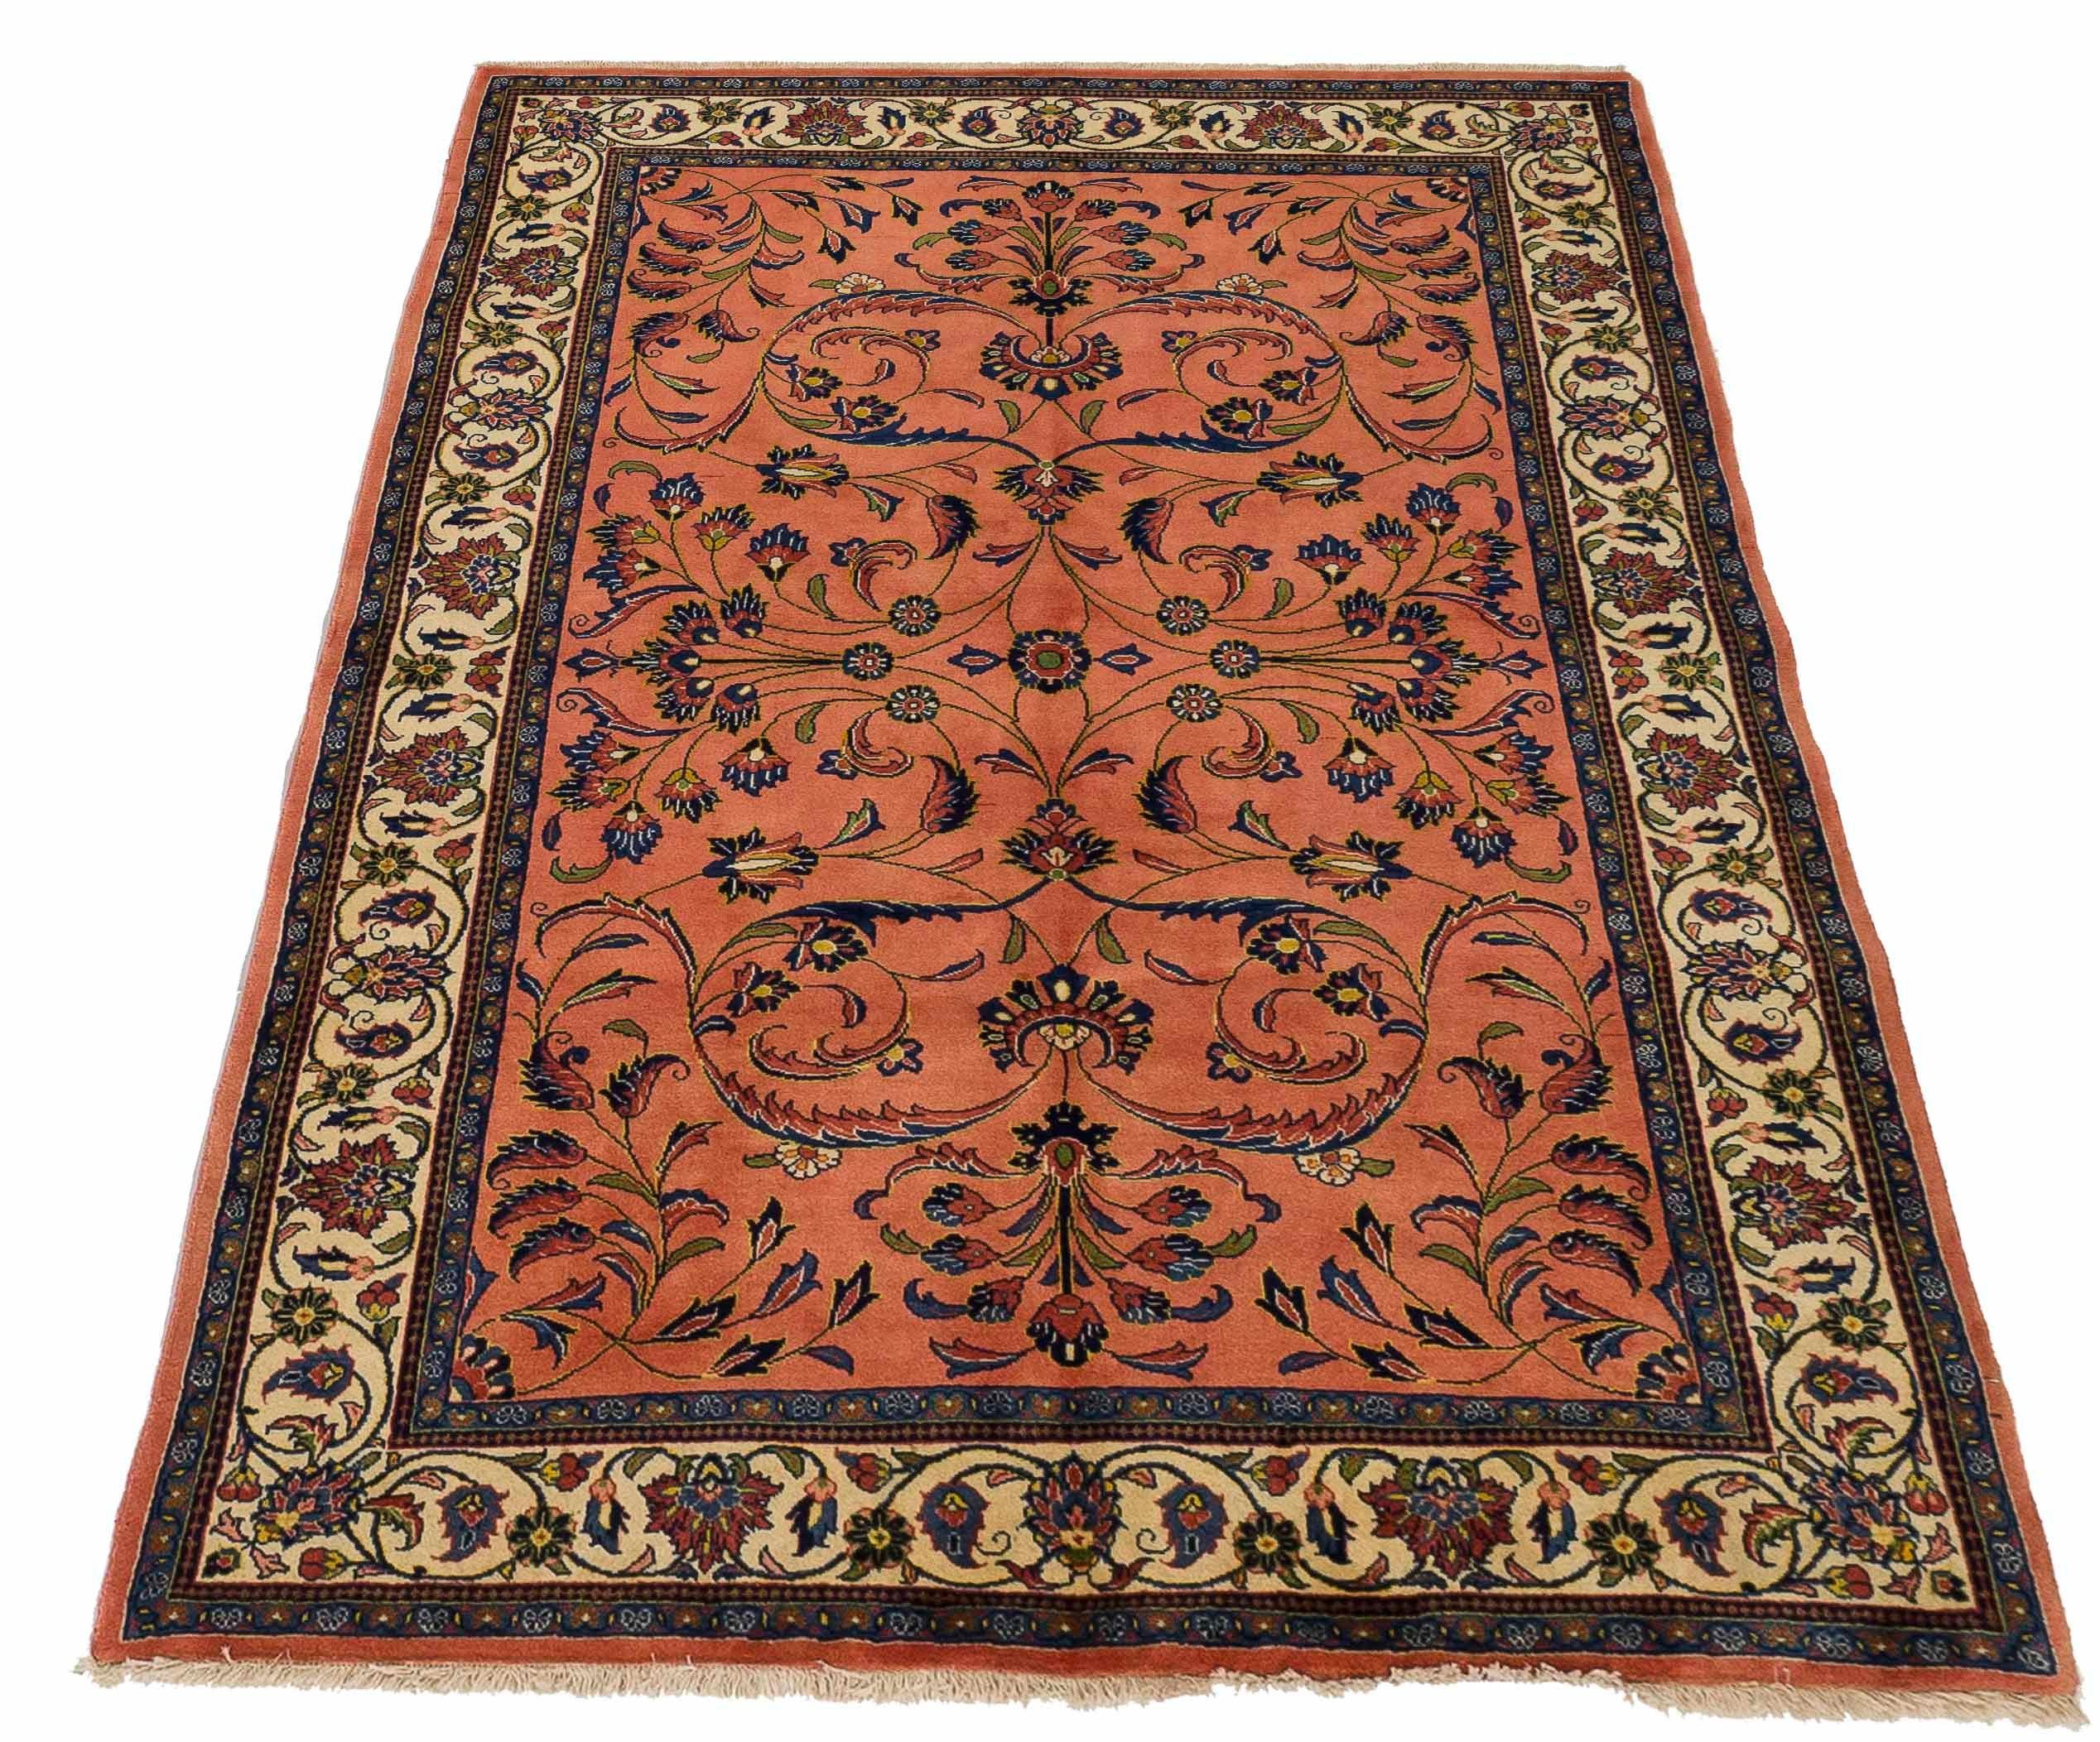 New Persian Area Rug, Handwoven with High-Quality Sheep's Wool, Colored with Safe Natural Vegetable Dyes, Traditional Sarouk Design, Skilled Artisan Workmanship, Suitable for any Home Interior Design, Moderate Dimension 5'5